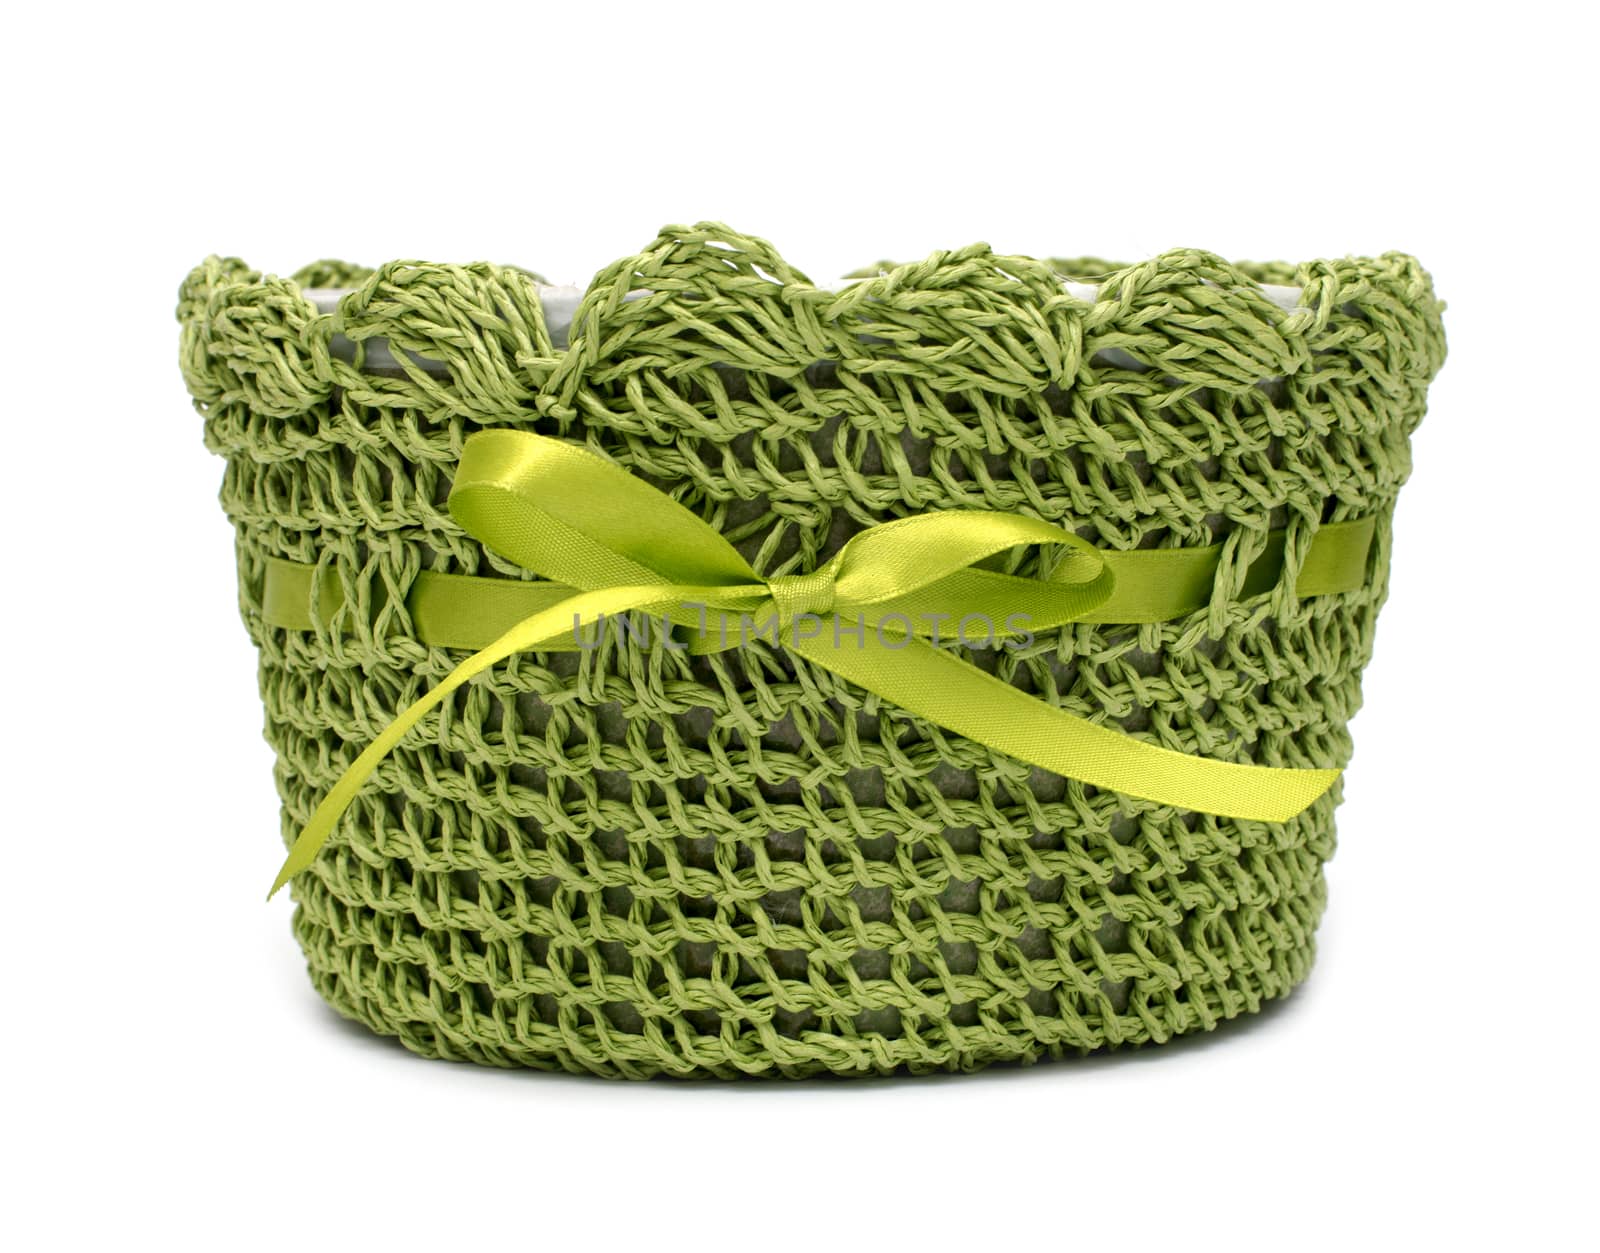 Green empty basket on a white background by DNKSTUDIO